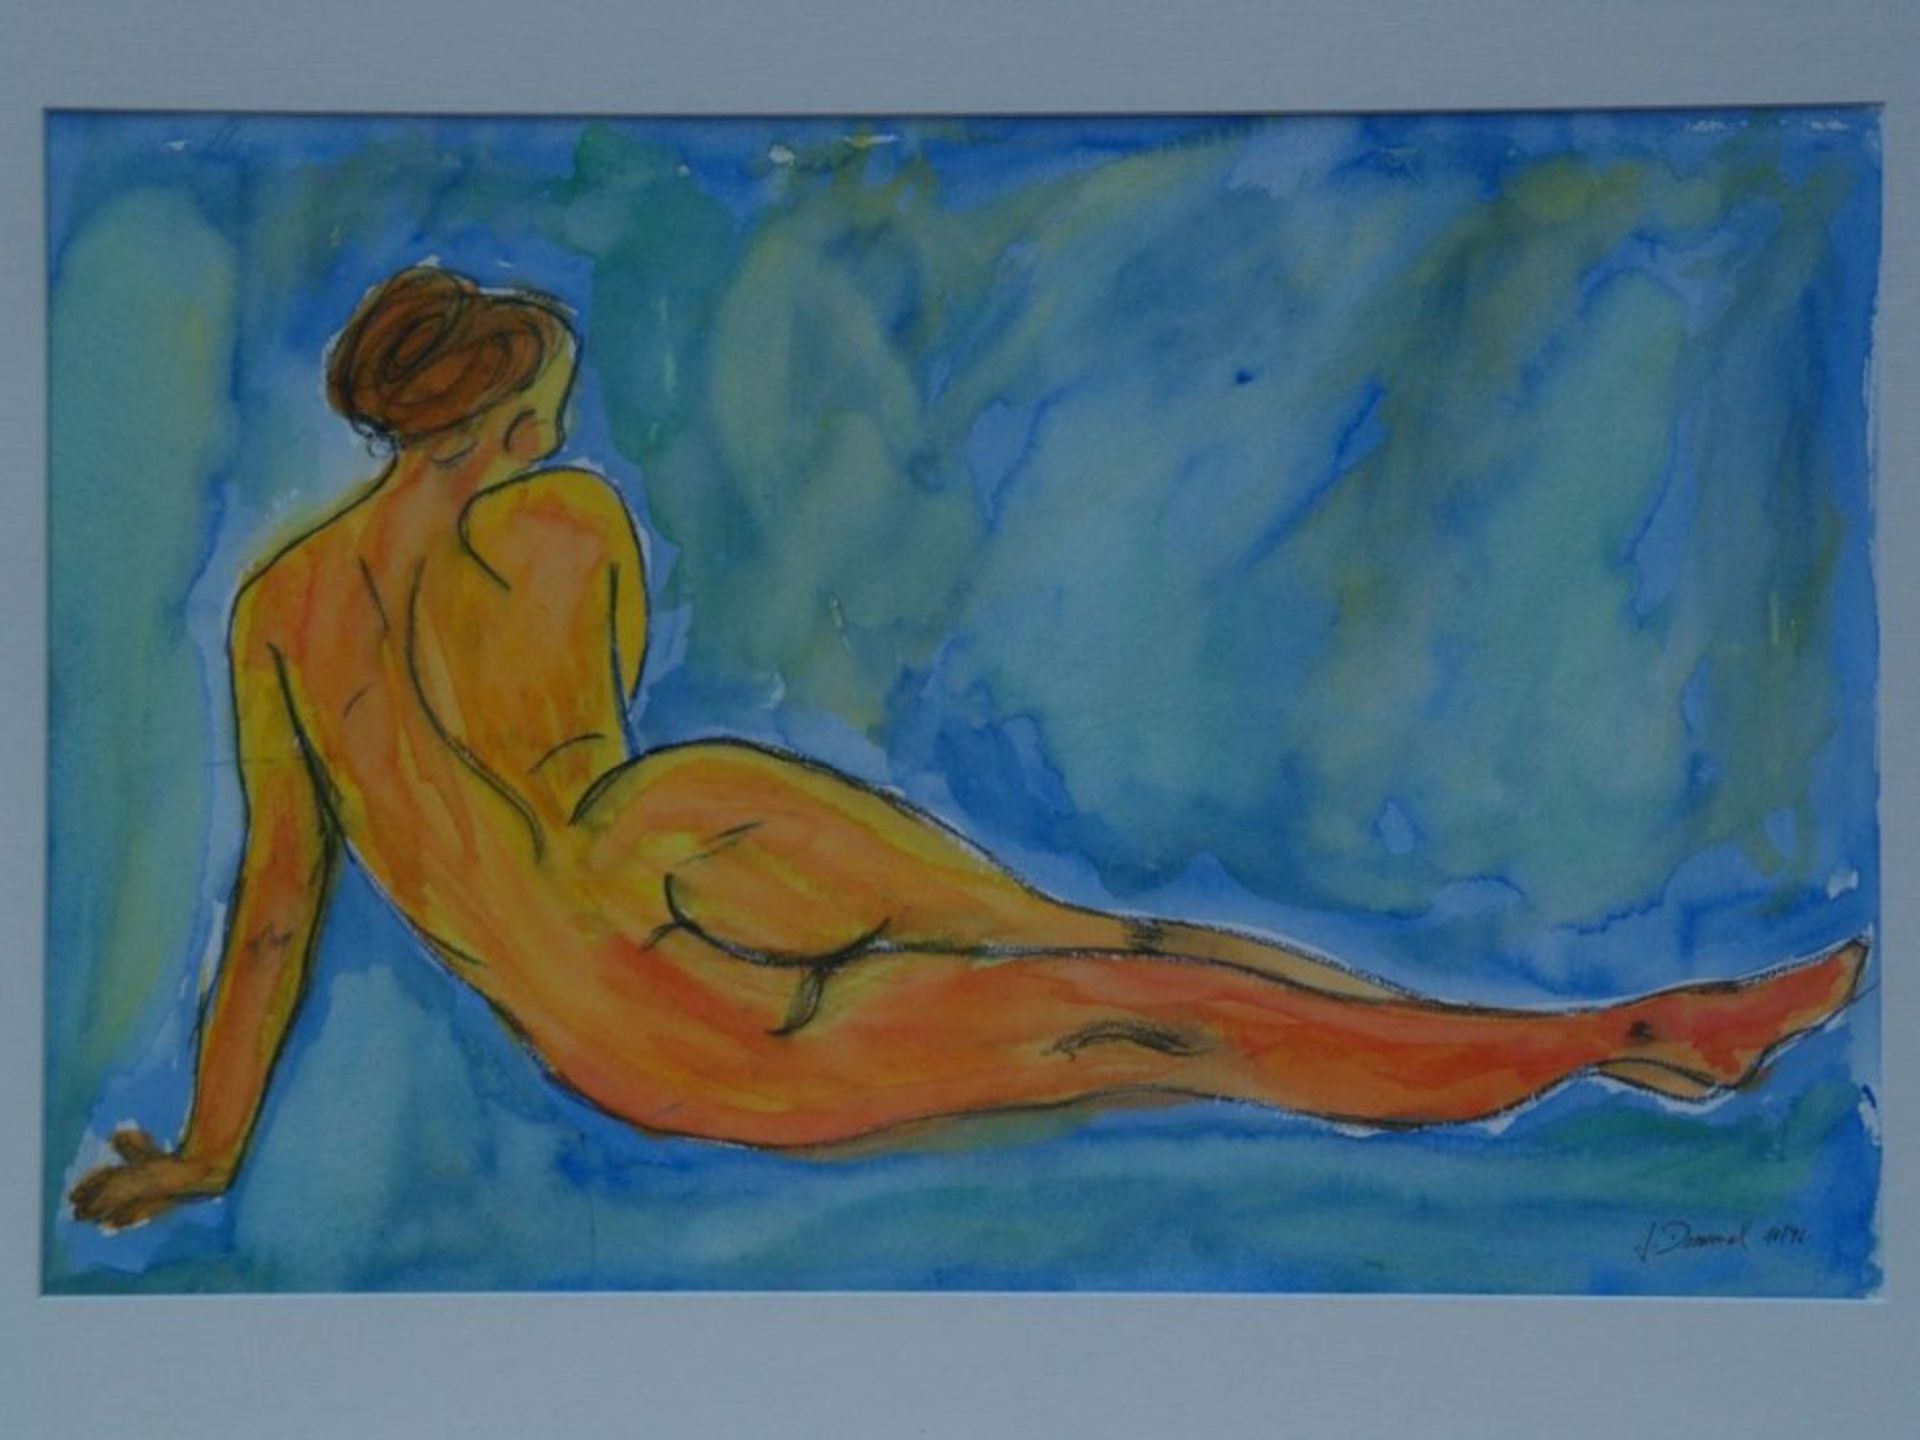 Dommel, J. - Female back, watercolor, signed and dated 10.96, approx 31x48cm, mounted under glass